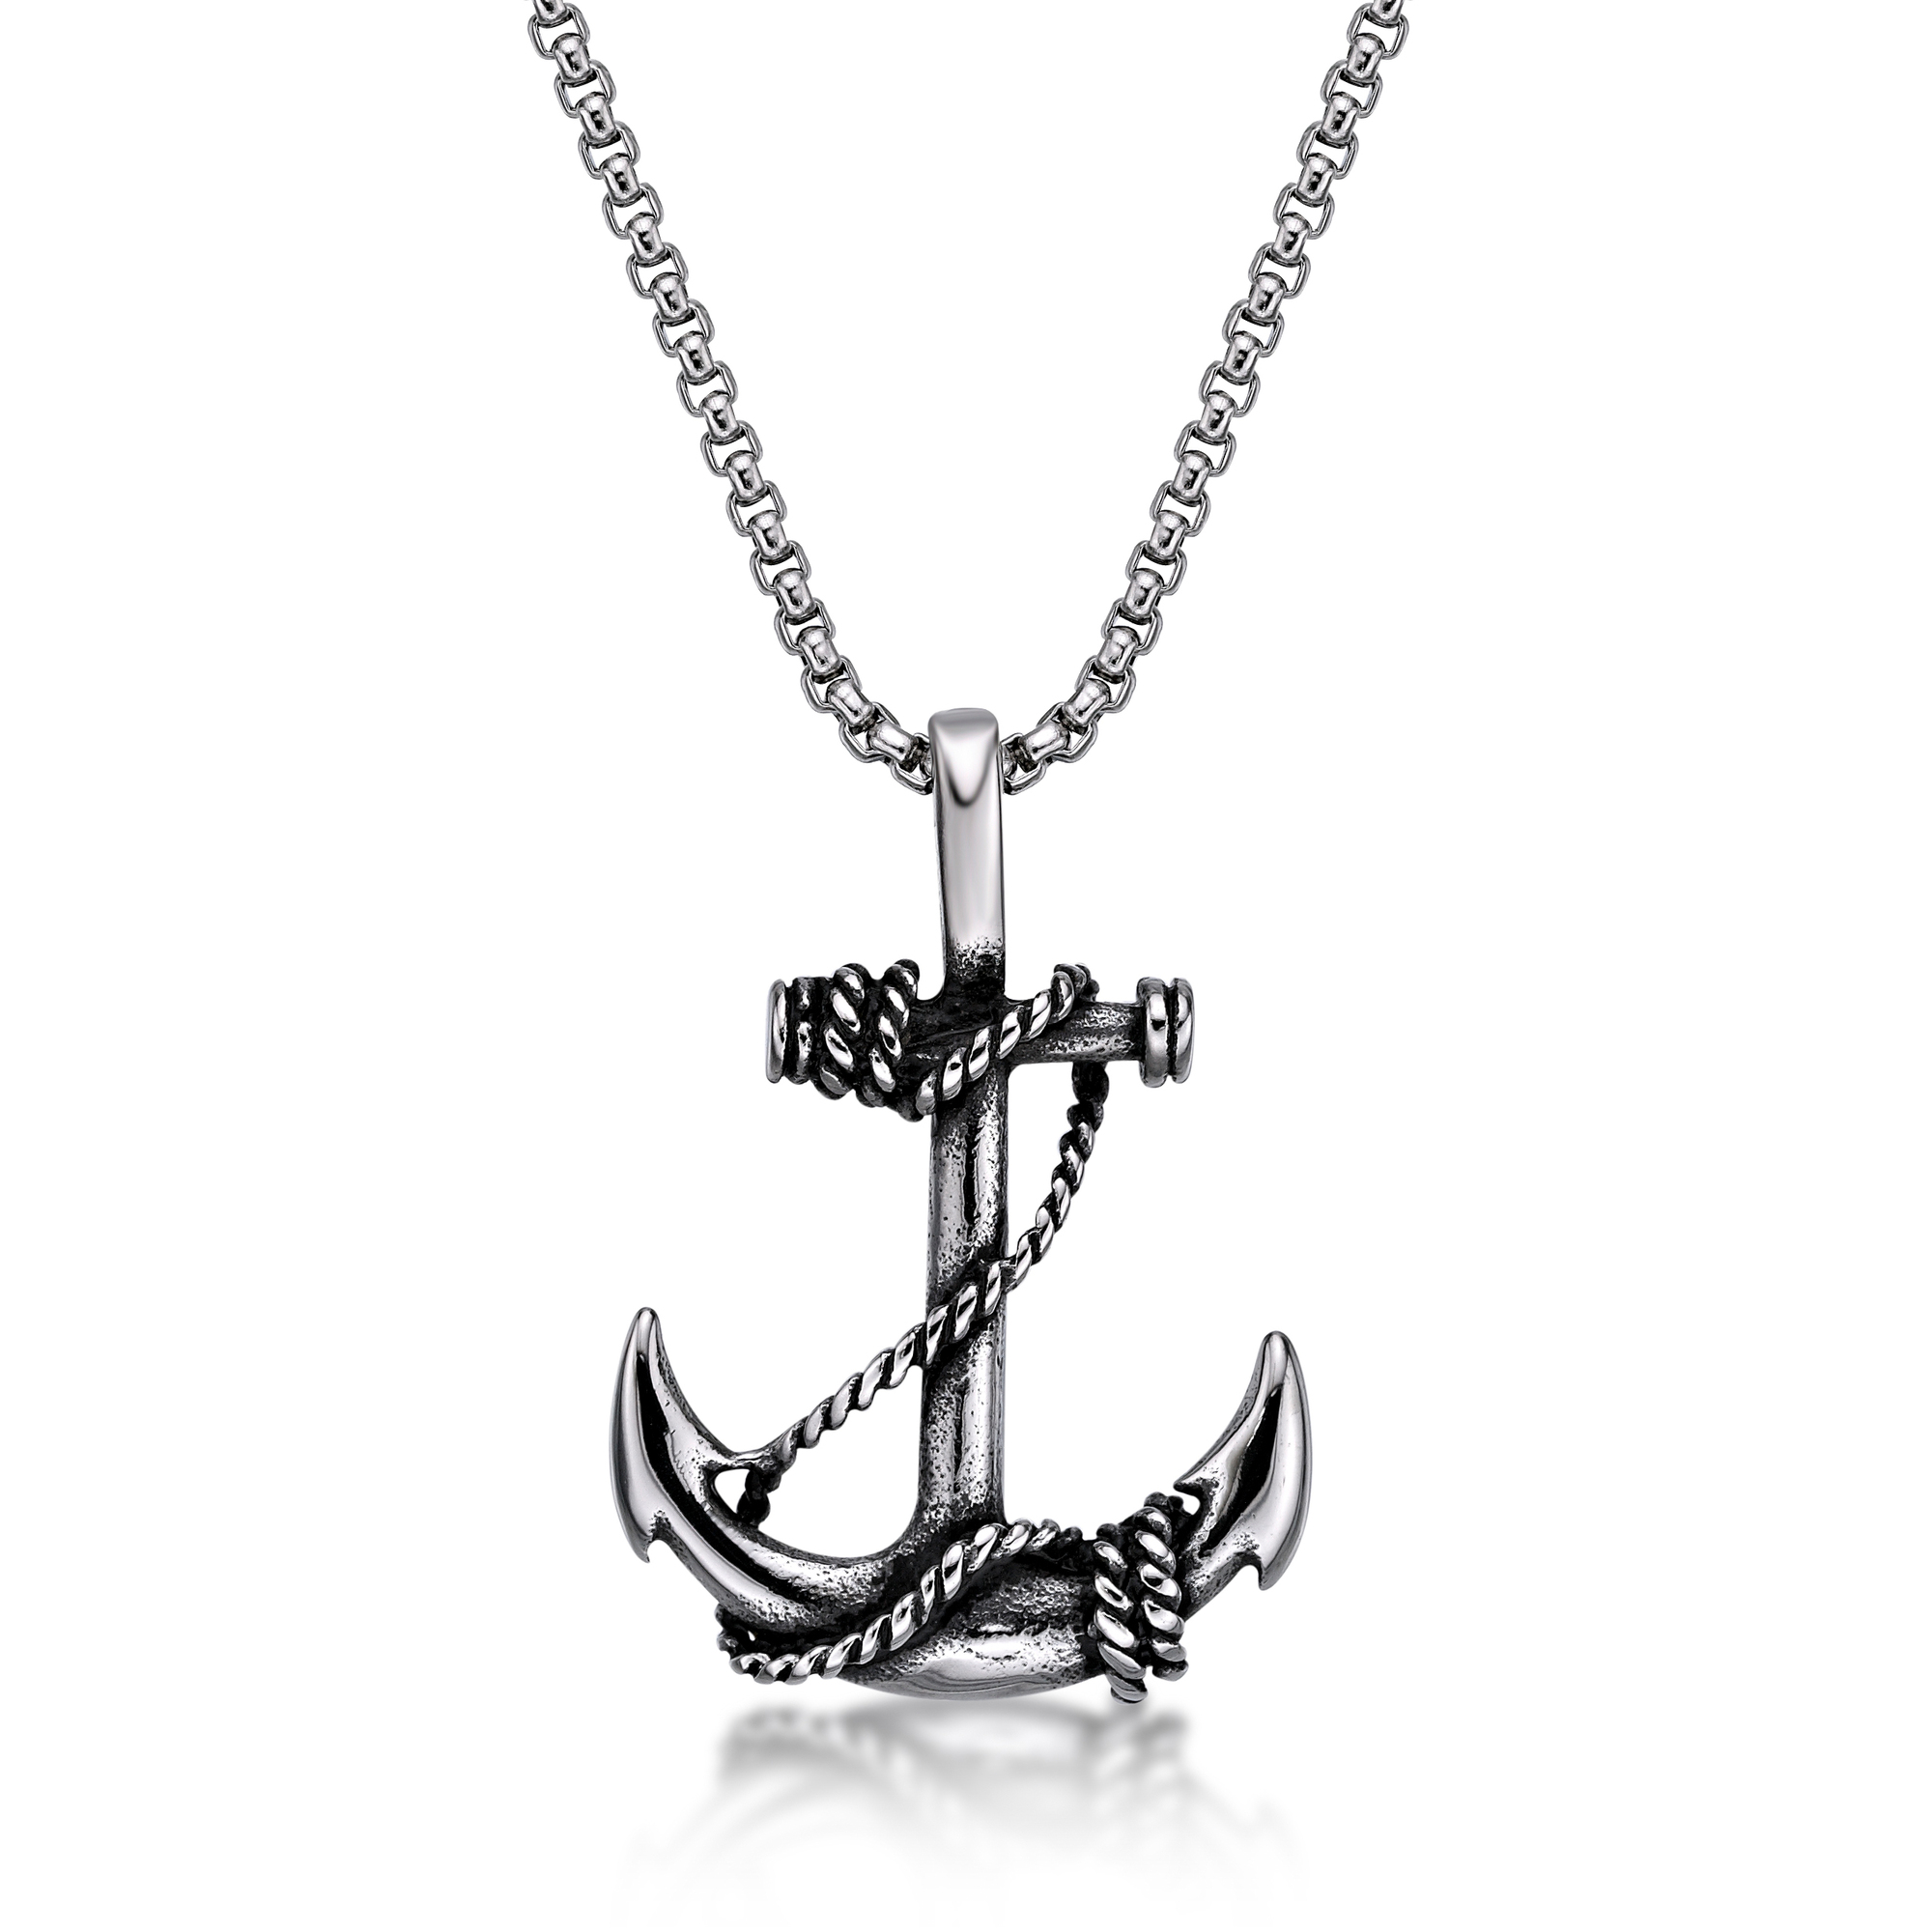 45318-pendant-mens-collection-stainless-steel-45318-2.jpg